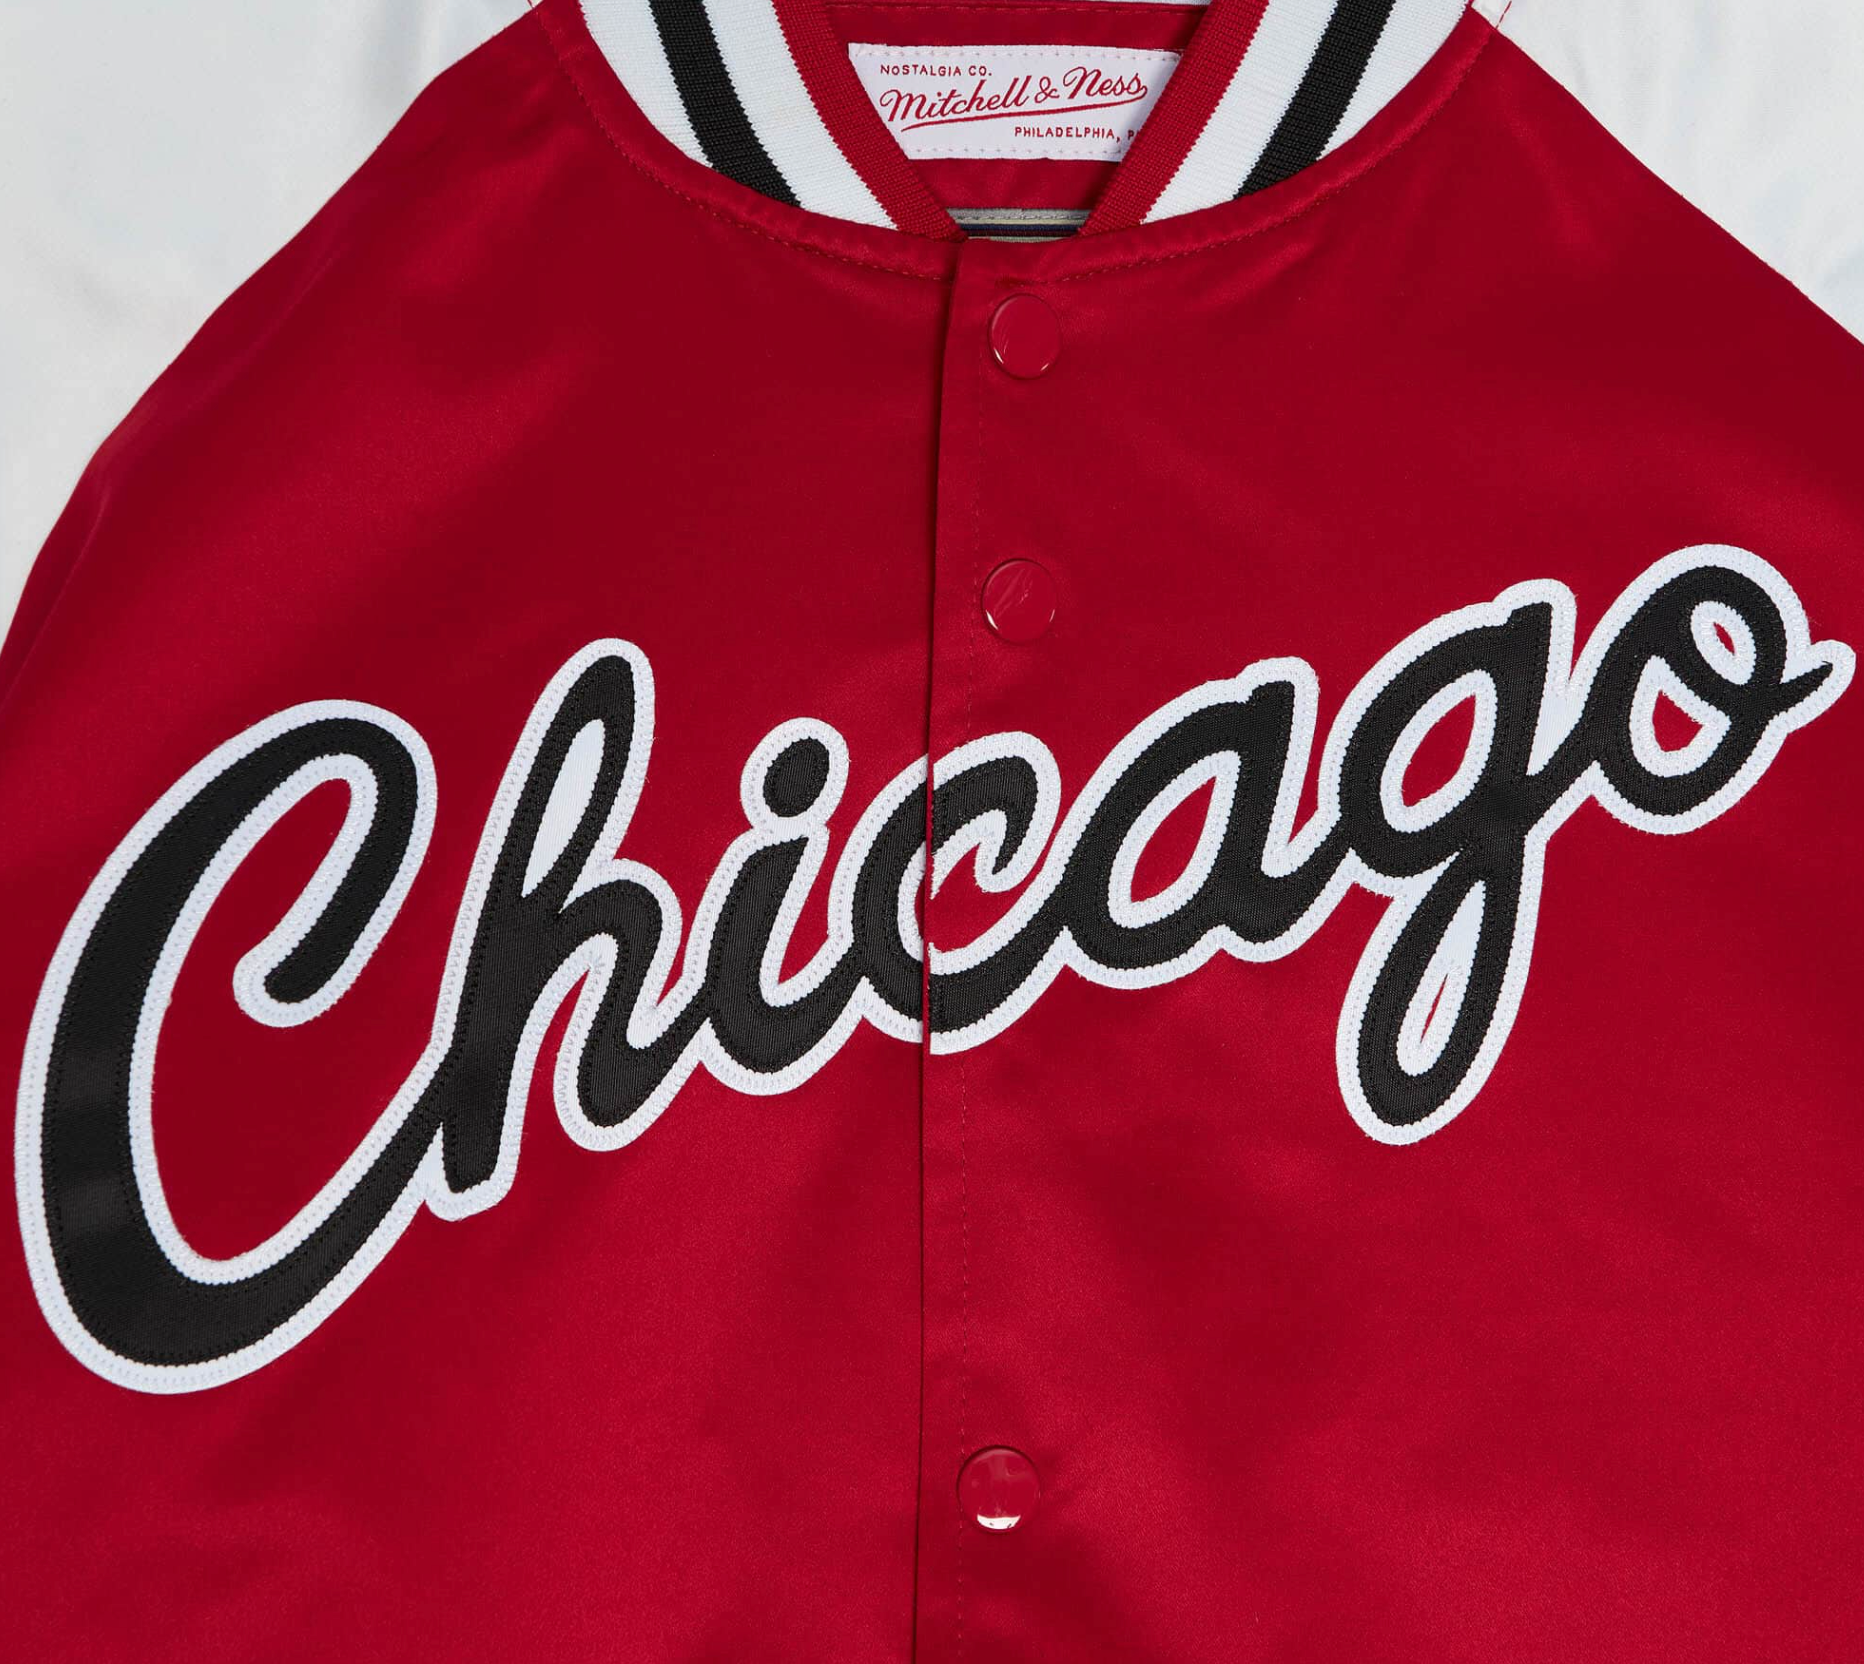 Mitchell & Ness Nba Chicago Bulls Satin Jacket in Red for Men